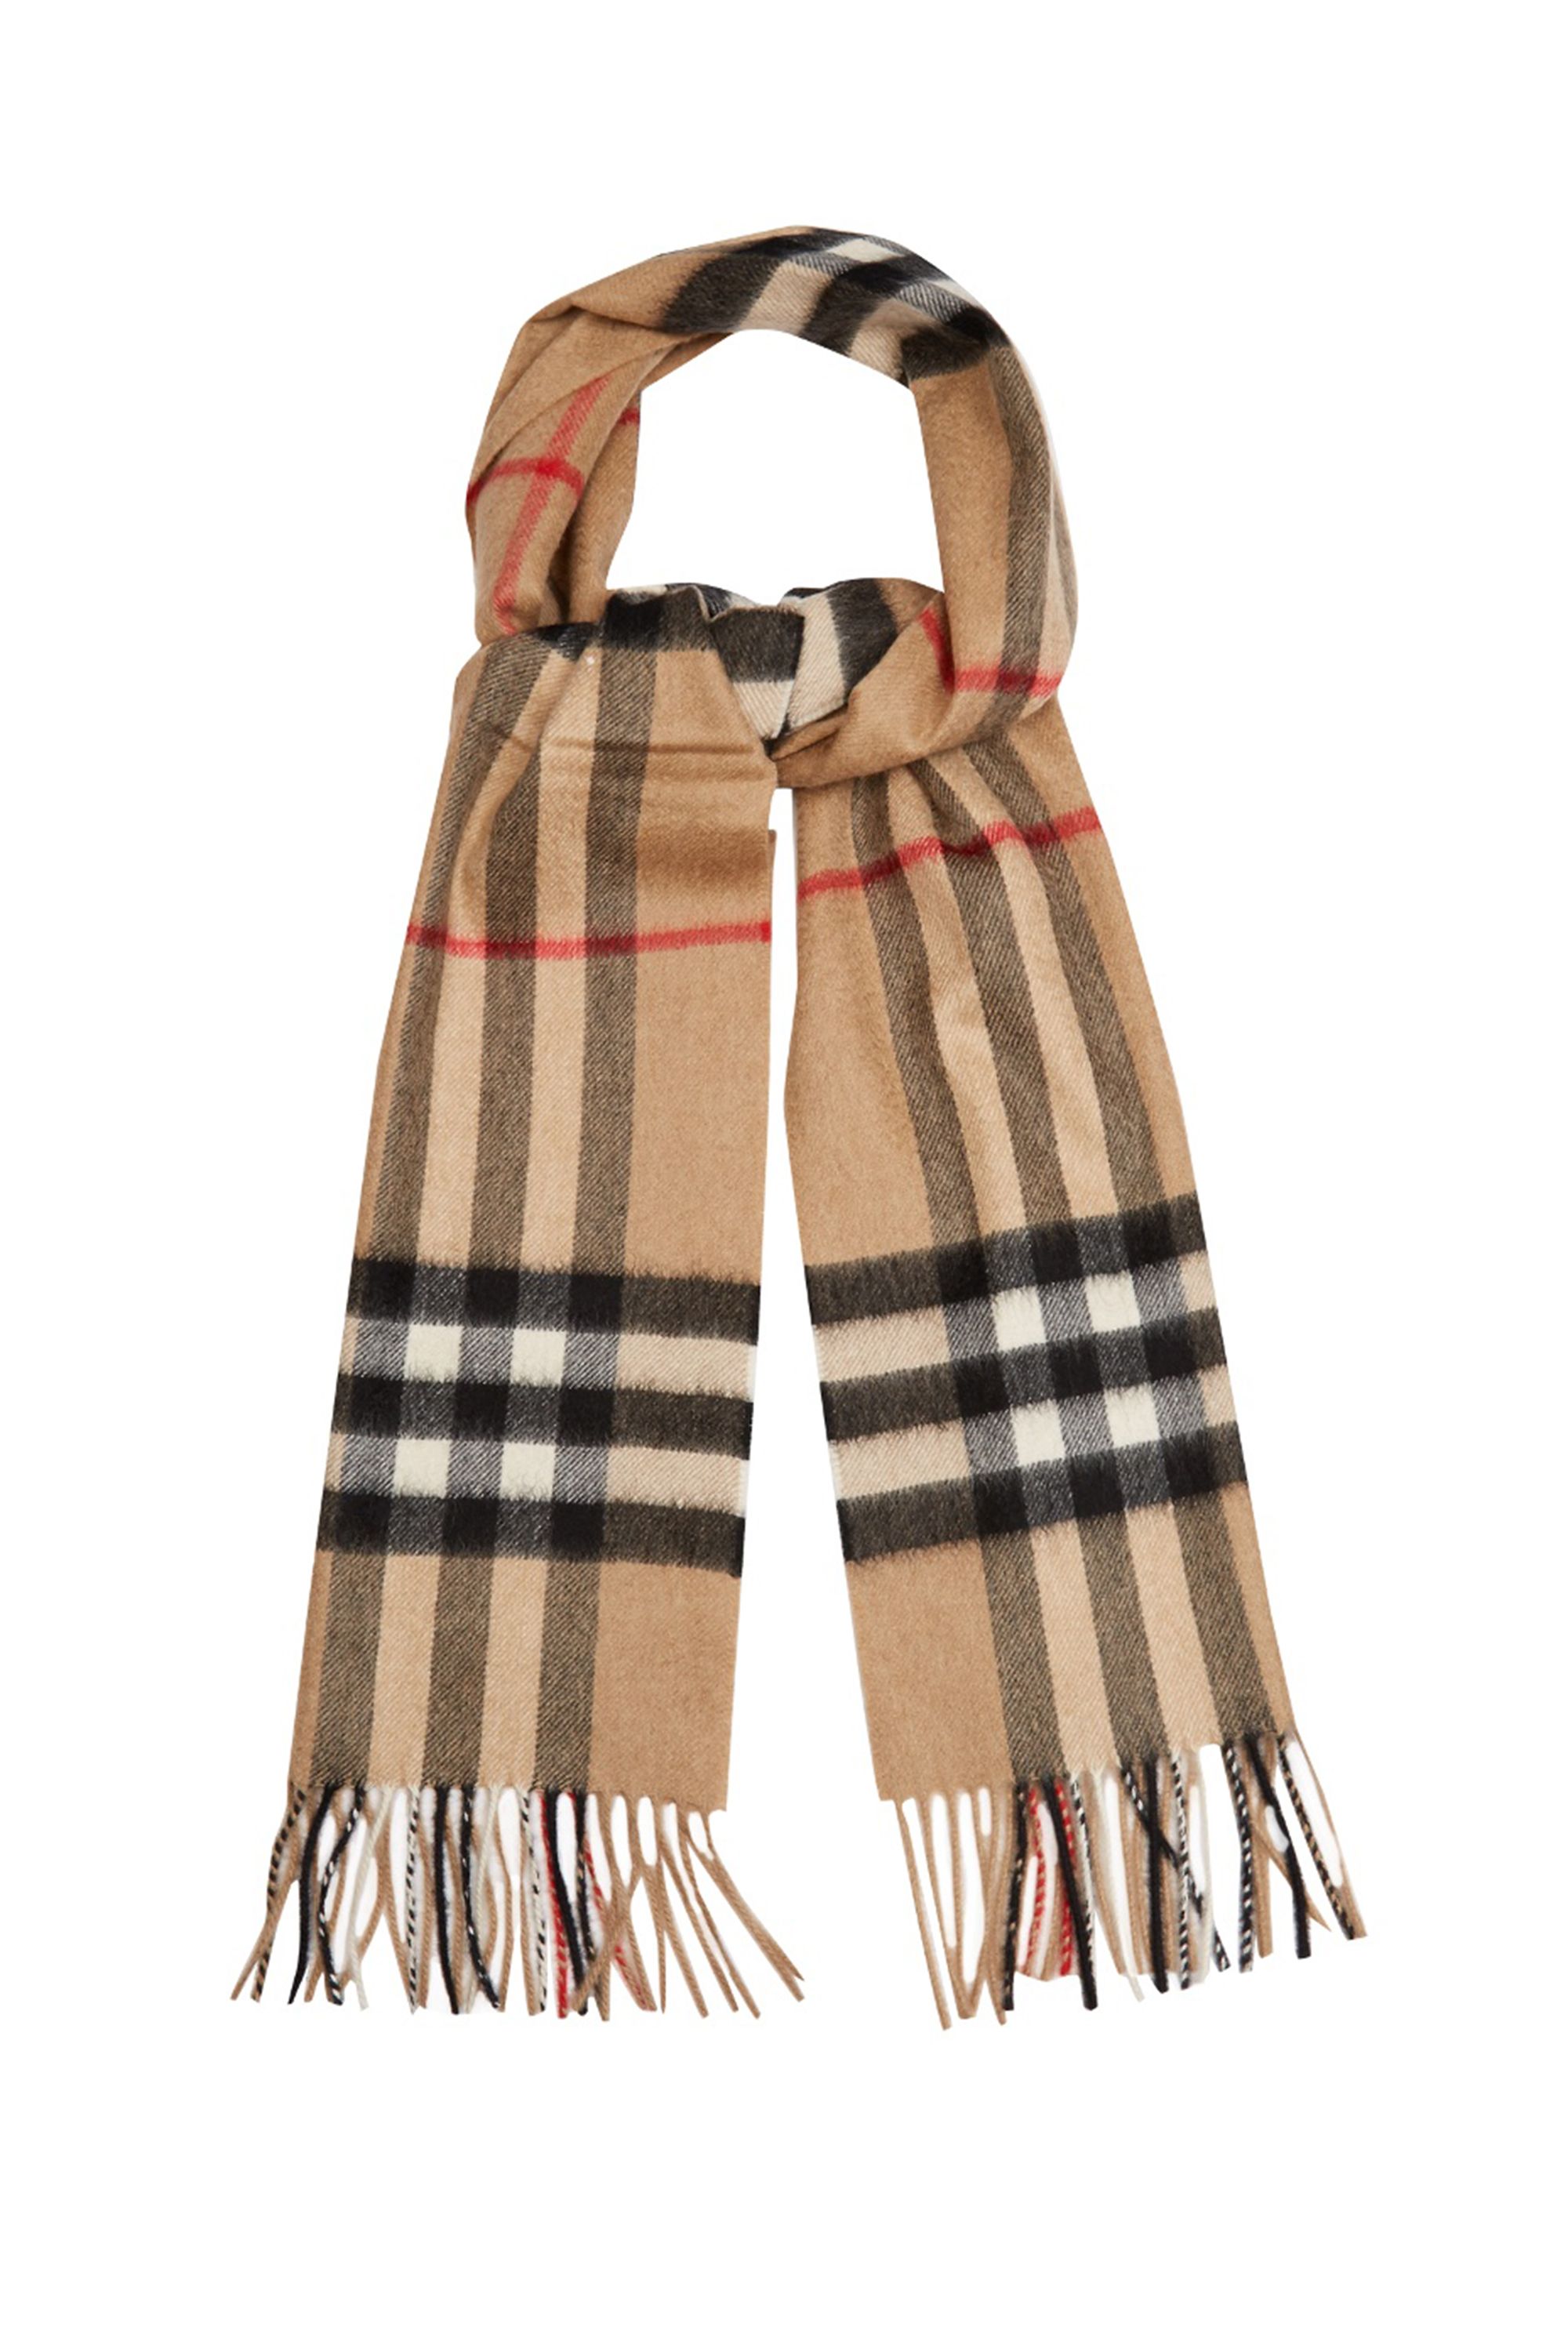 iconic burberry scarf